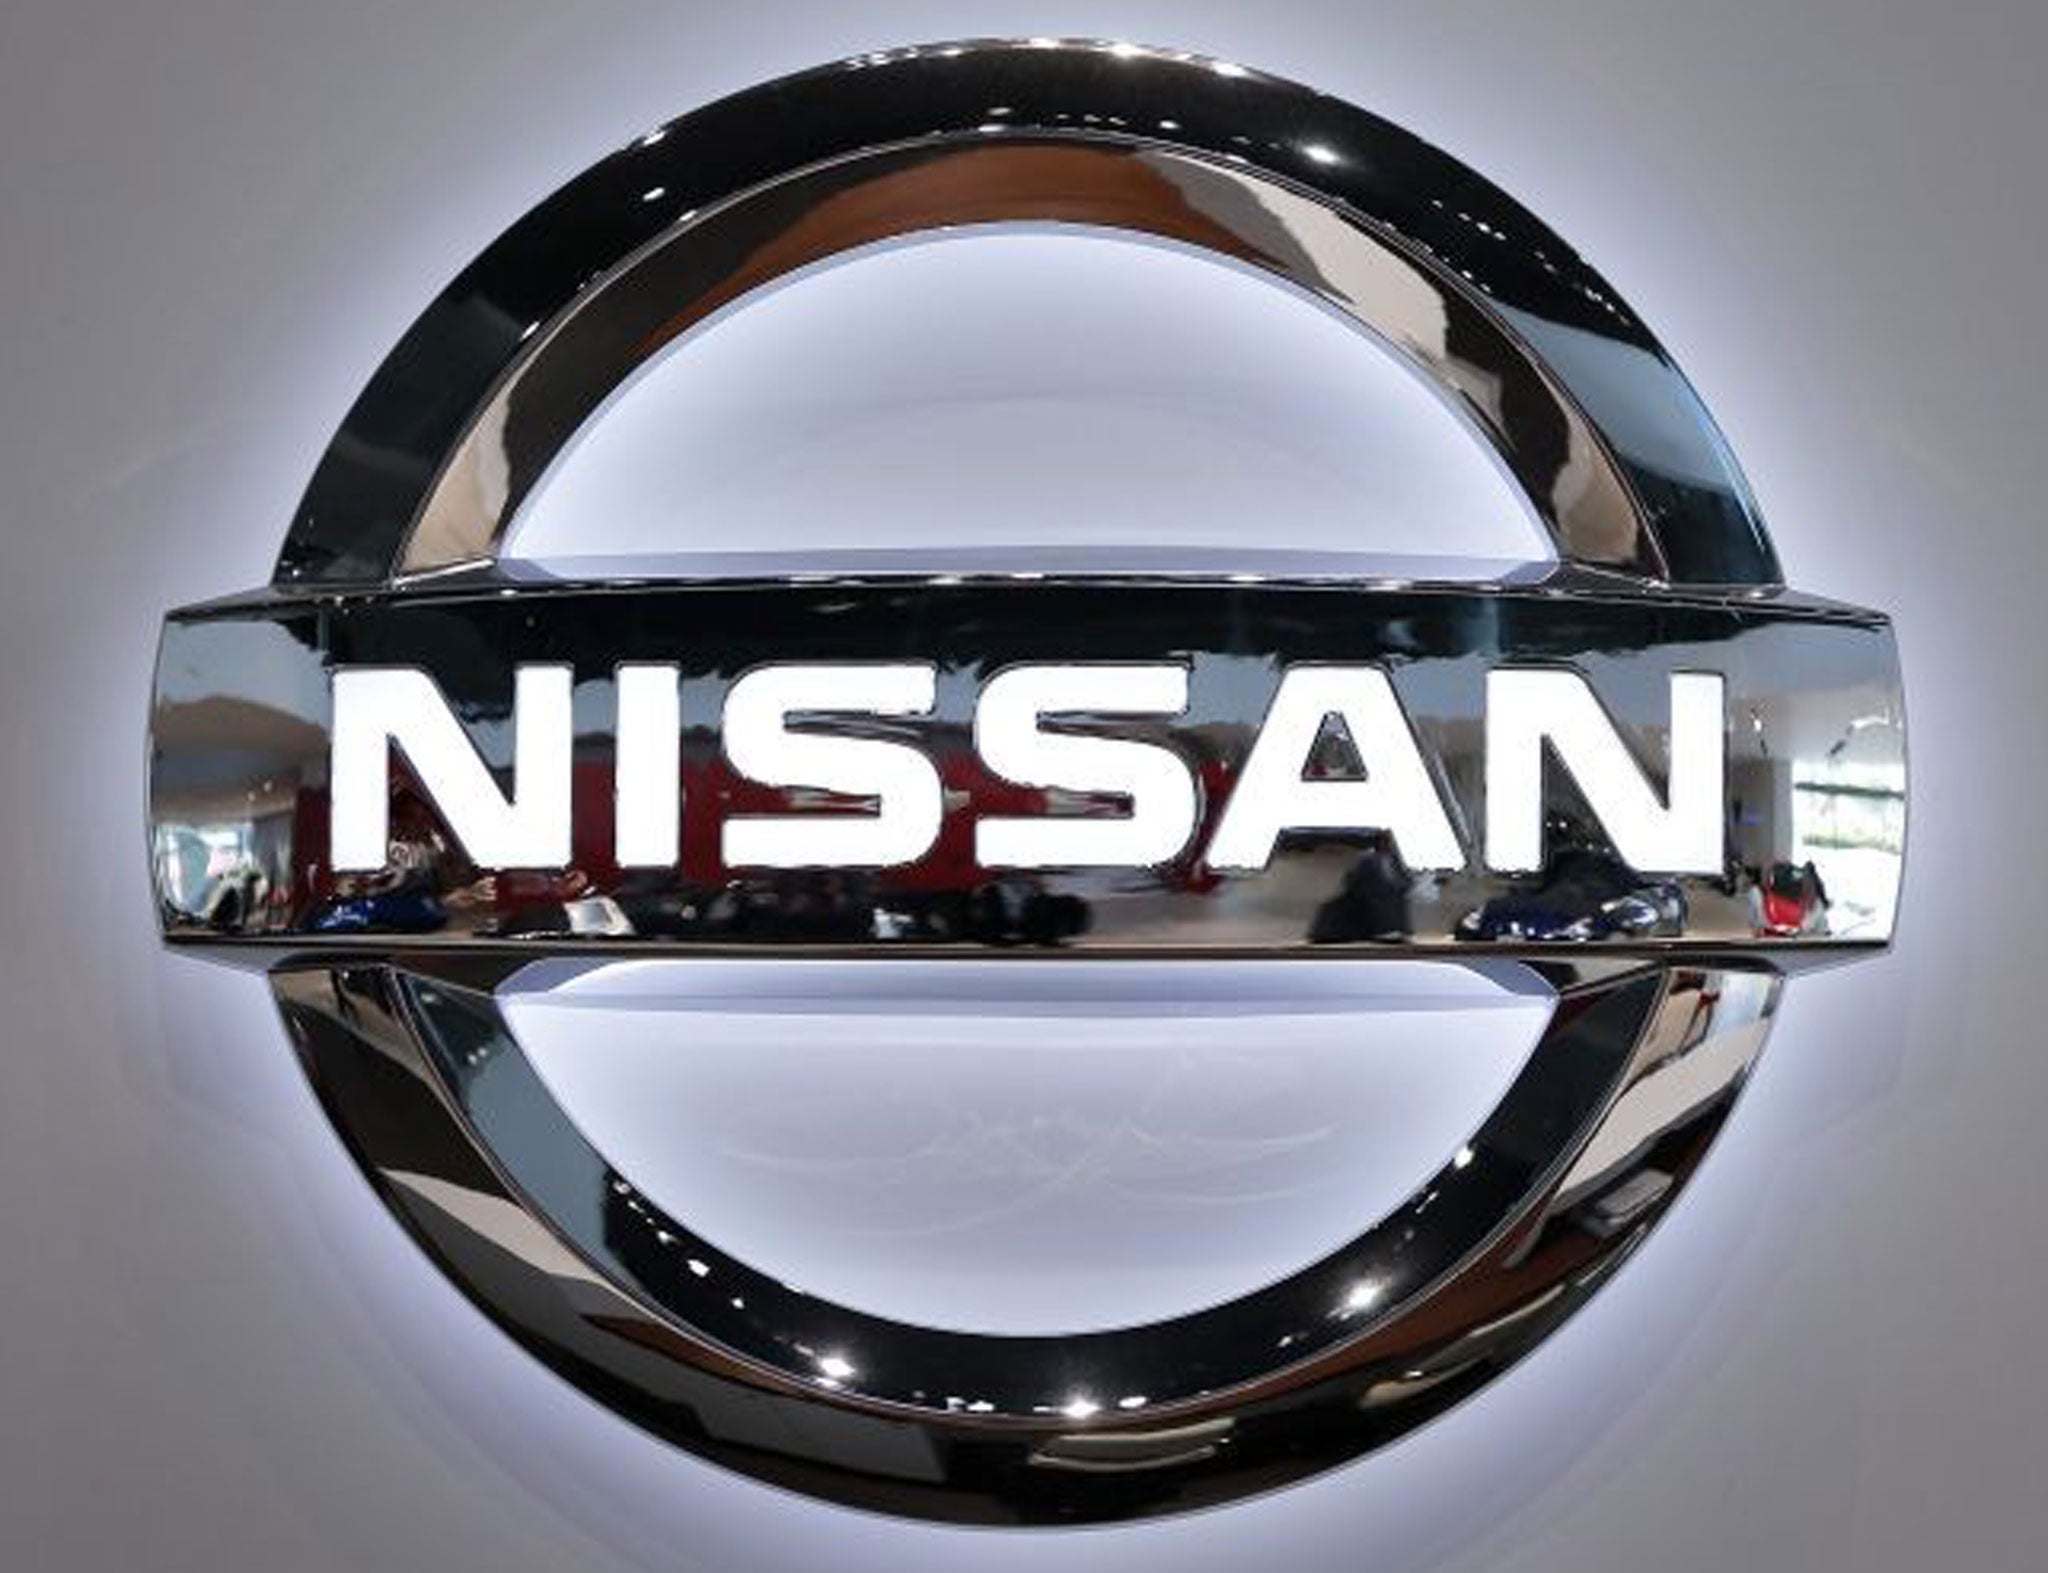 Nissan has recalled more than 800,000 cars